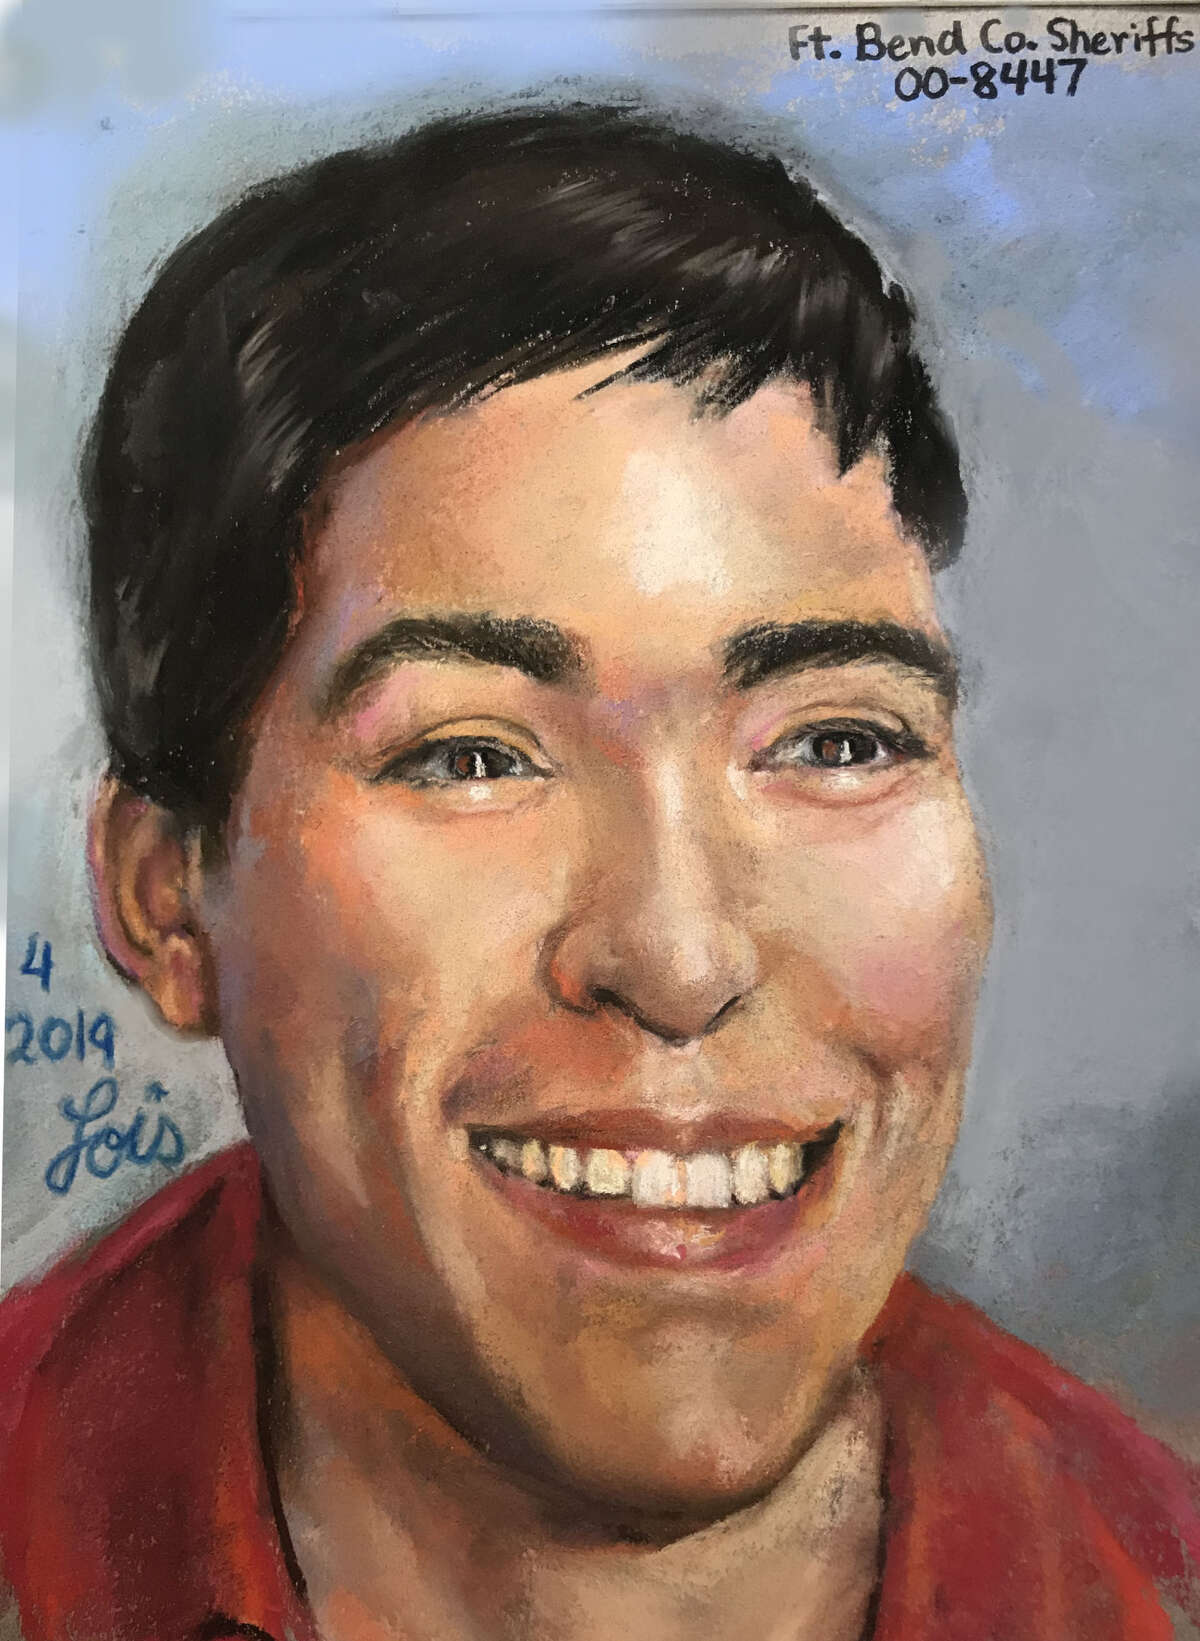 The remains of the young Hispanic male were found on Dec. 17, 2000, near the intersection of the 8500 block of W. Davis Estates Road and FM 1994, according to an FBCSO news release. He was 5-feet, 3-inches tall and weighed approximately 160 pounds. He is estimated to be between 16 and 23 years of age. Renown forensic artist Lois Gibson drew a rendering of what the man may have looked like.